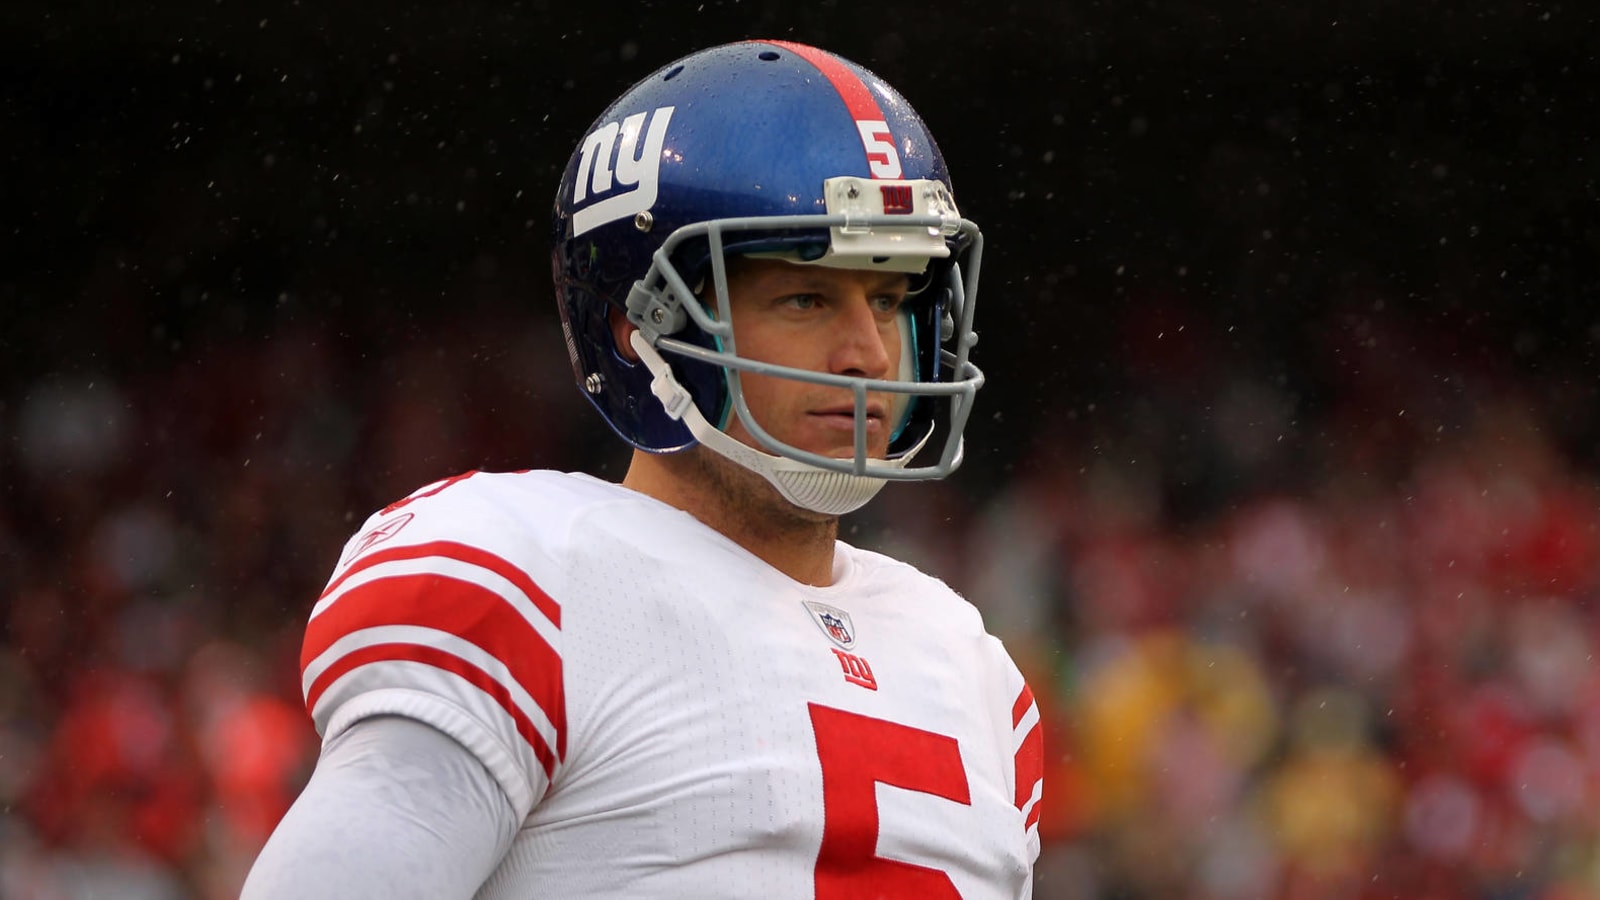 Giants approve replacement Super Bowl ring for Steve Weatherford